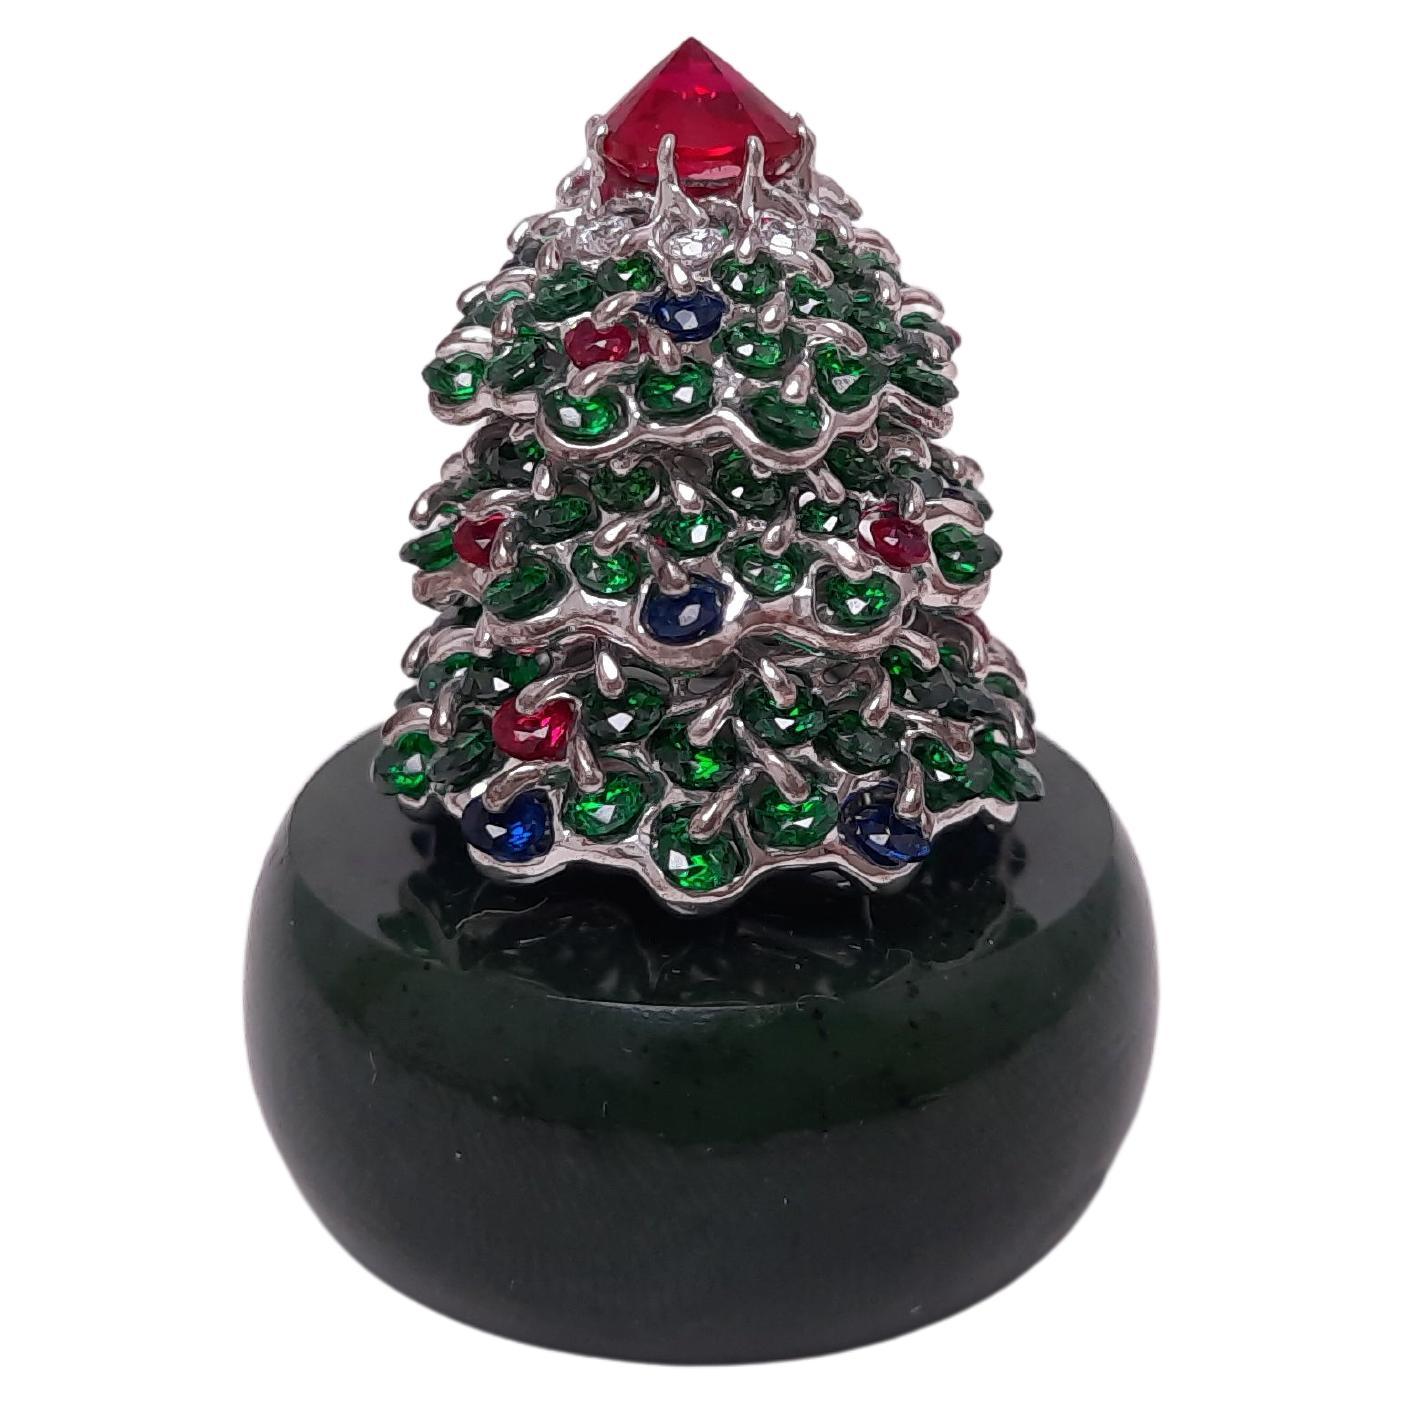 A Christmas tree from MOISEIKIN made of silver and Ural nephrite base shall fill your home with joy and happiness and brighten the coming year!

Interior decoration for the house in the form of a Christmas tree is a special gift for your family and